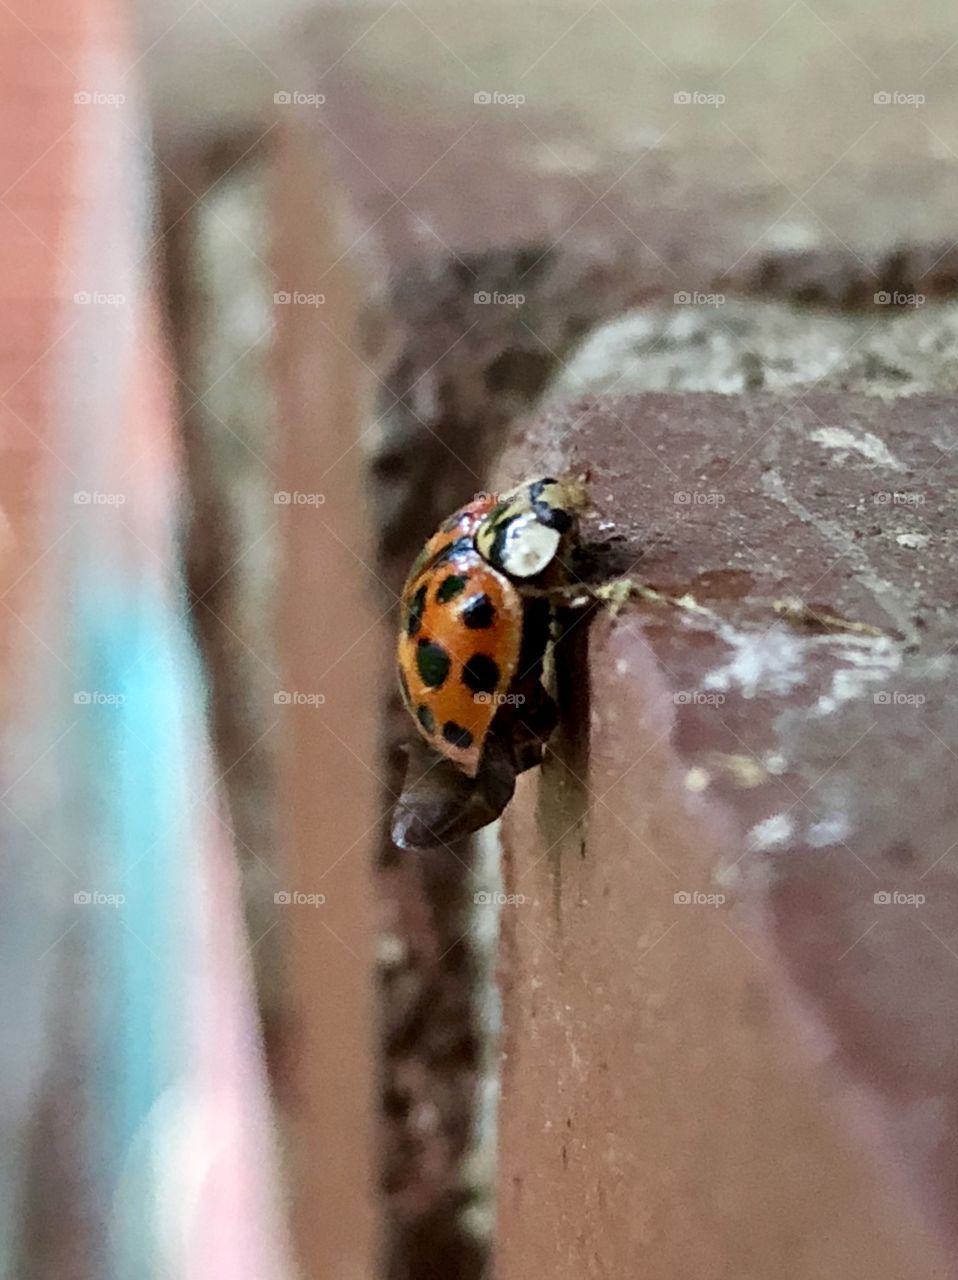 Lady Bug, lady bug, flew to my home, inspecting the bricks and the grout for spare loam. 